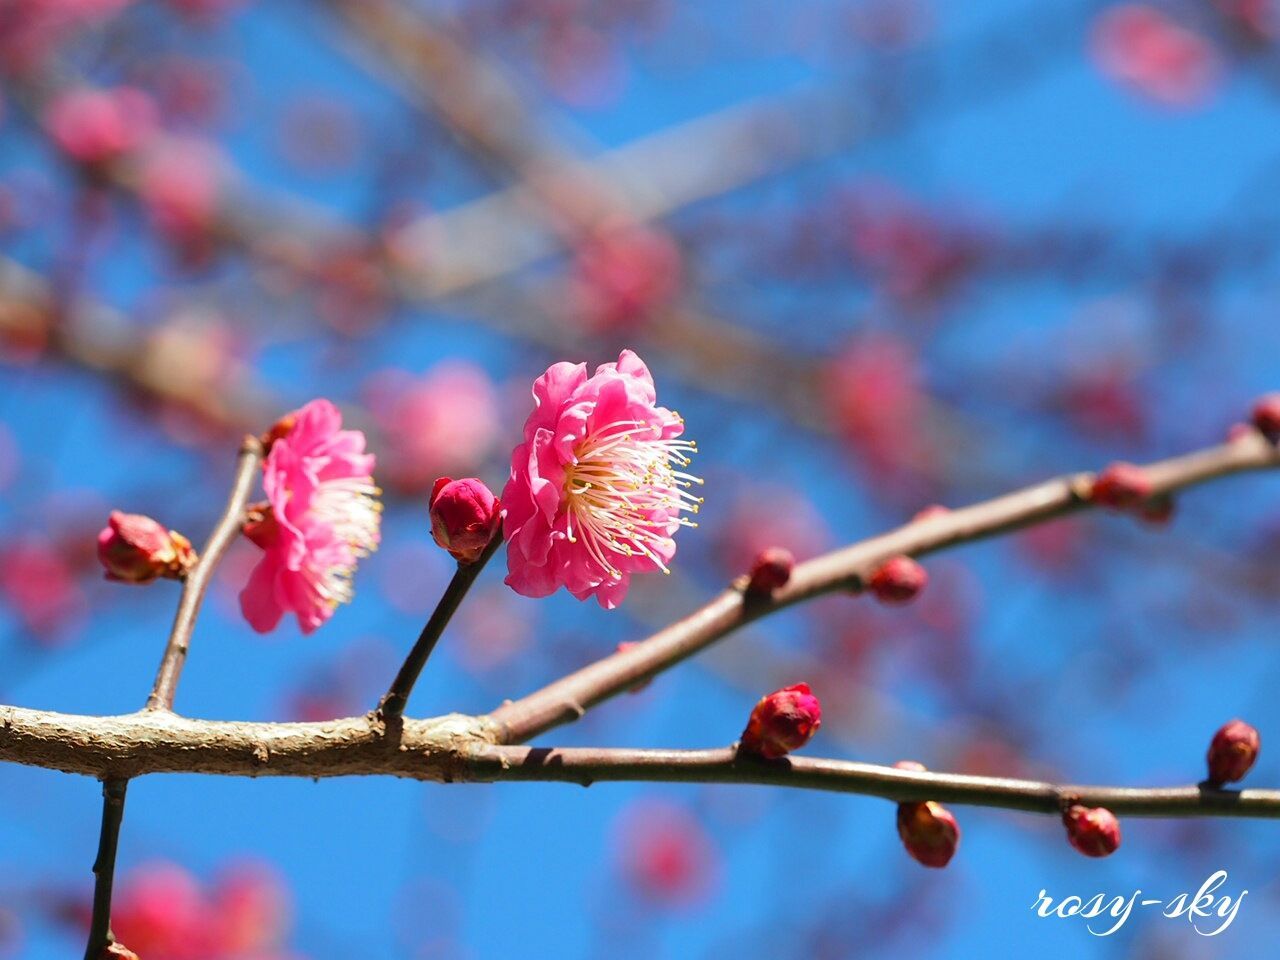 branch, flower, focus on foreground, freshness, pink color, growth, tree, close-up, nature, twig, fragility, beauty in nature, low angle view, day, bud, outdoors, selective focus, no people, blossom, cherry tree